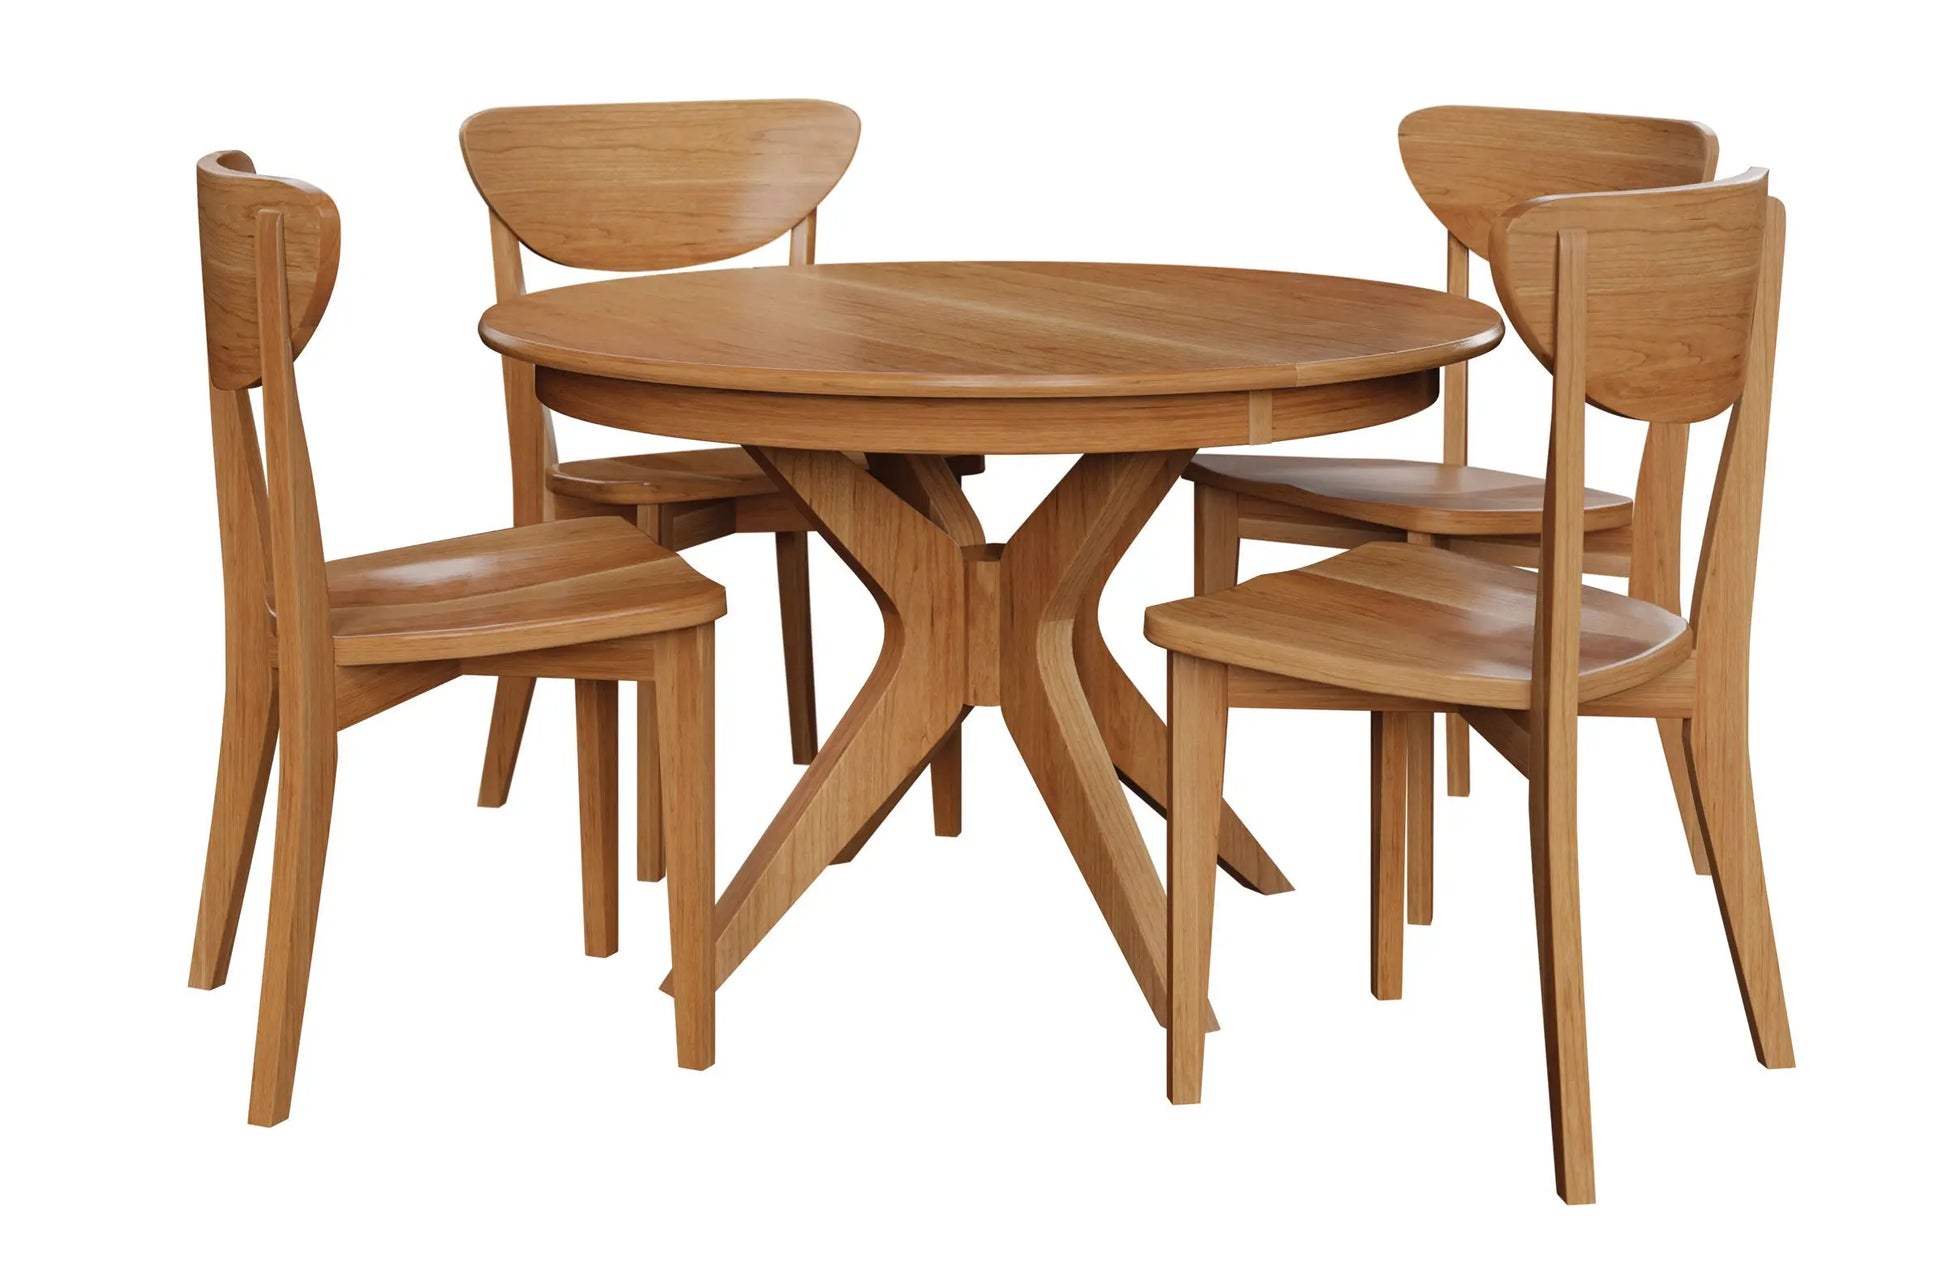 Experience dining versatility with the 'Corcovado' modern round dining table